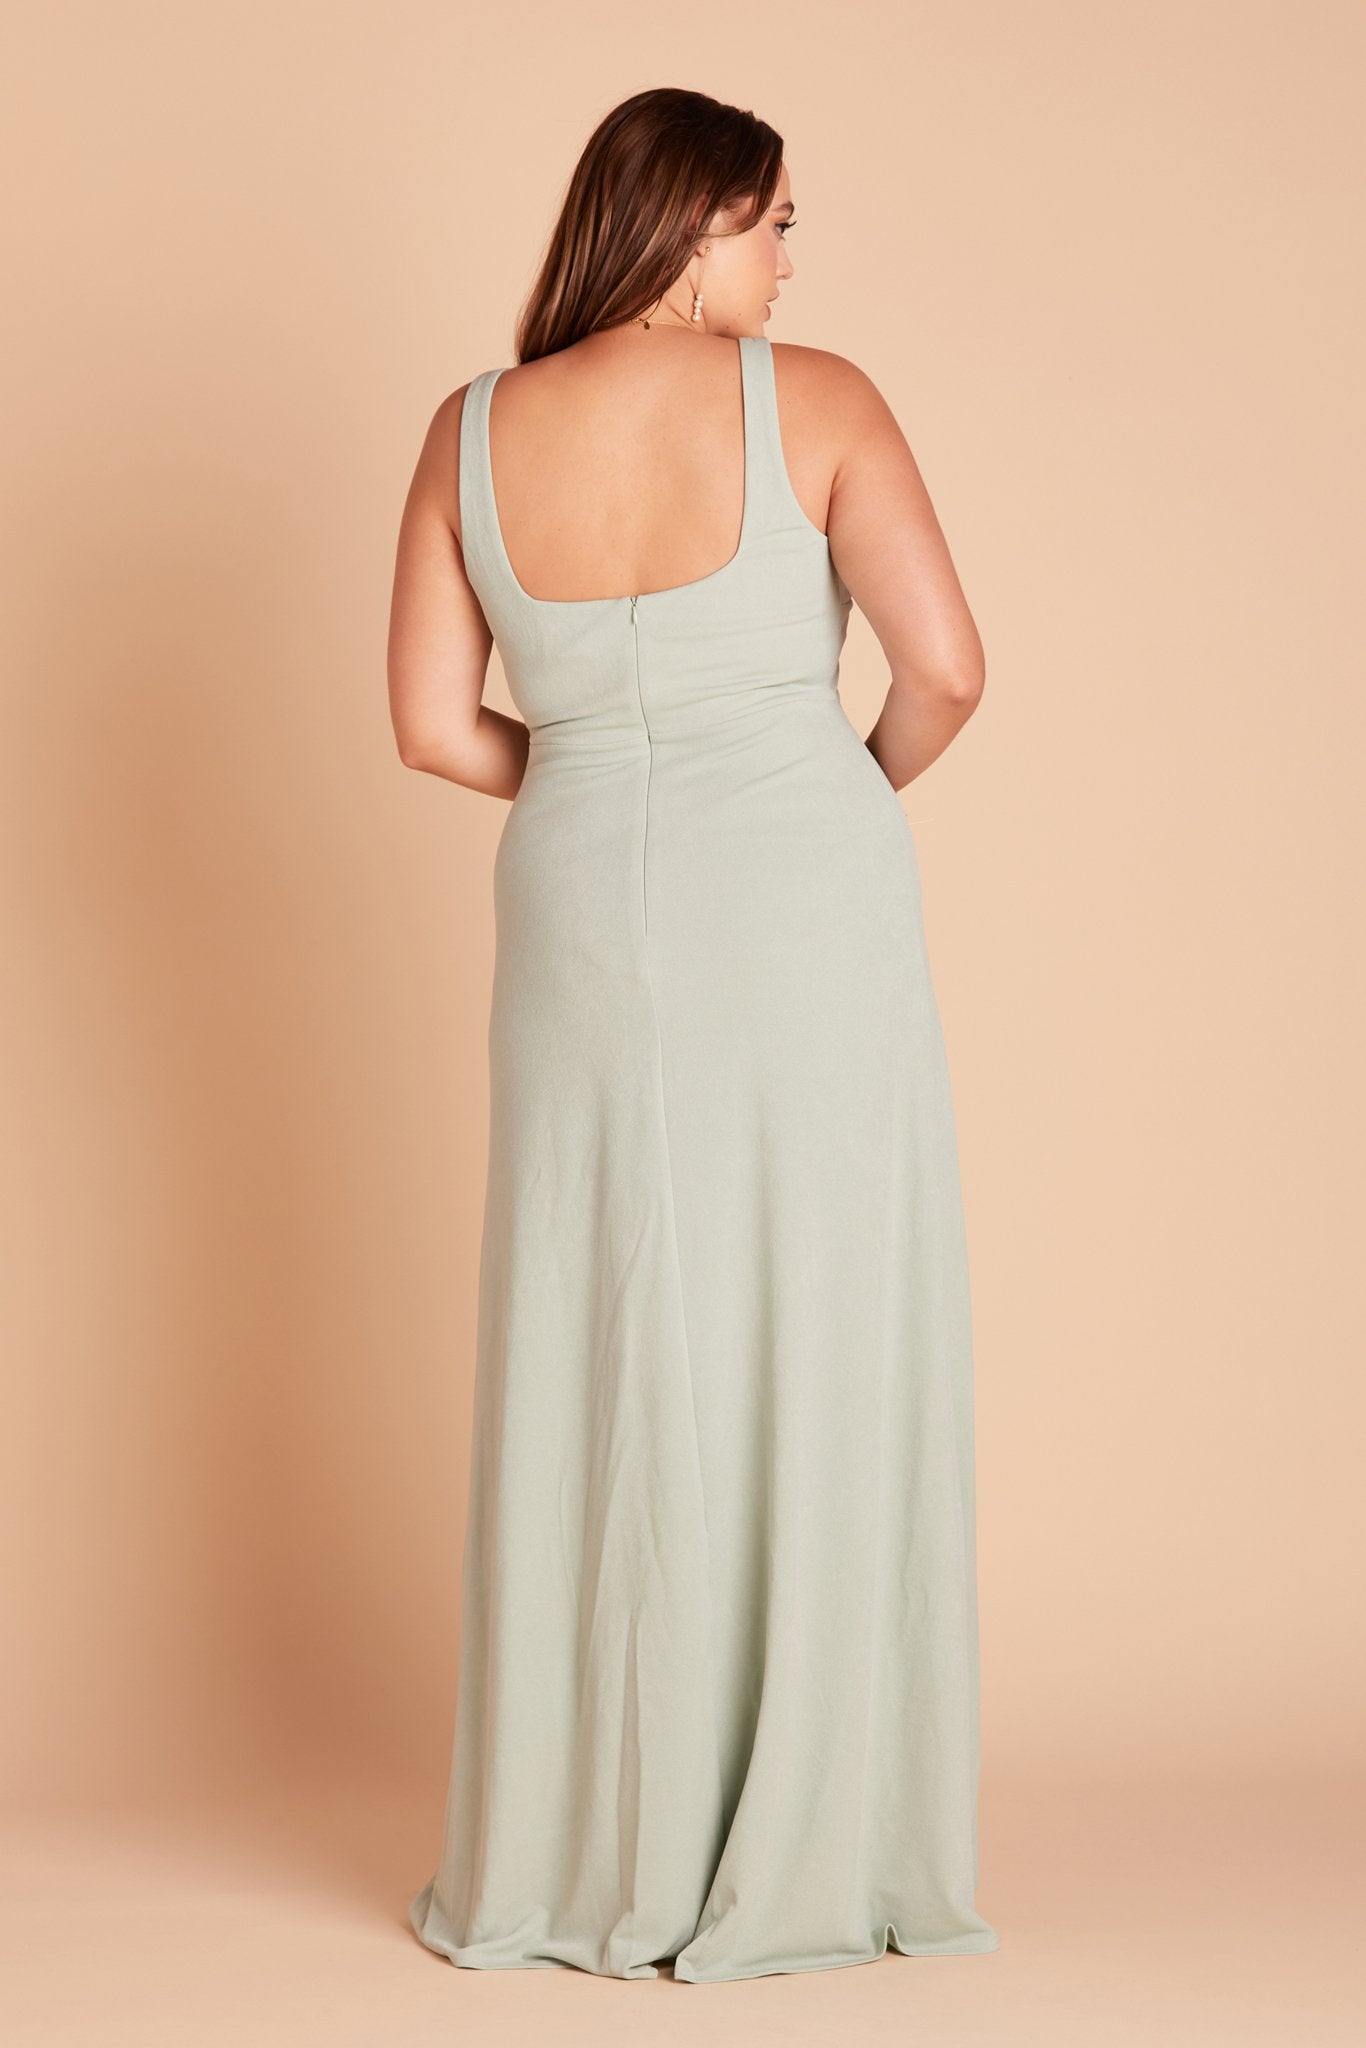 Back view of the Alex Convertible Plus Size Bridesmaid Dress in sage green crepe without shoulder ties features a square cut that falls just below the shoulder blades.